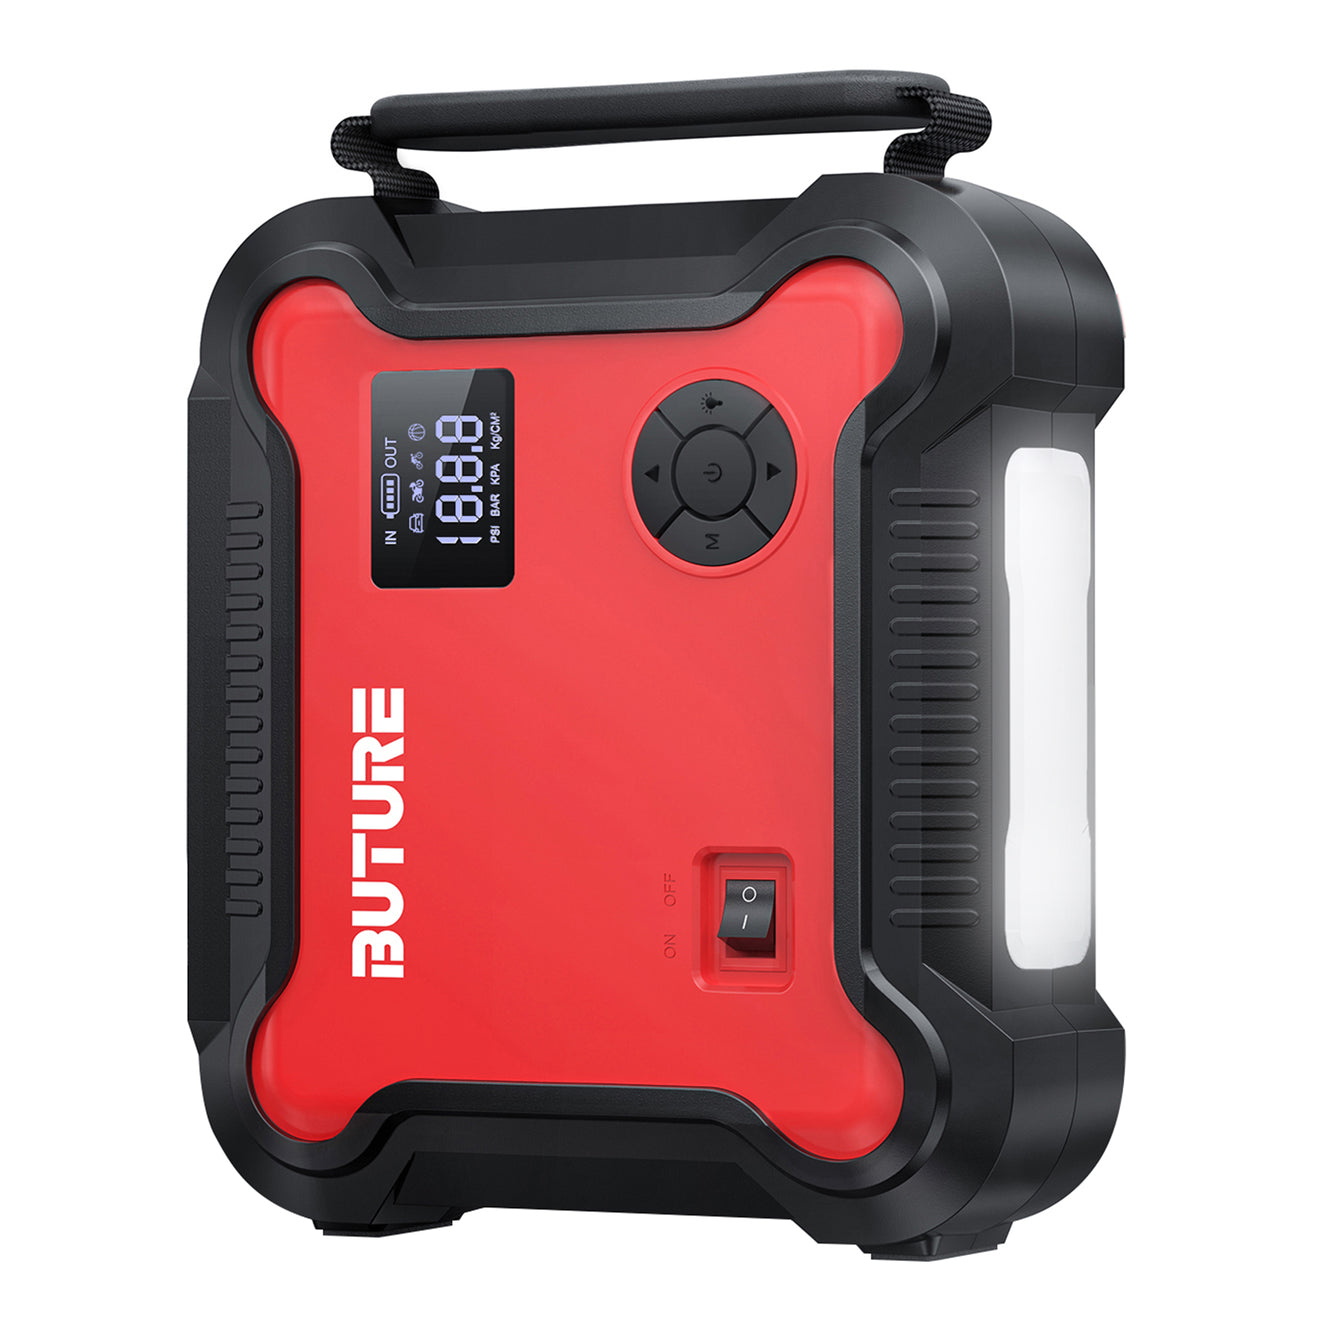  Portable Car Jump Starter with Air Compressor, BUTURE 150PSI  4500A 26800mAh Booster Pack (All Gas/8.0L Diesel) Digital Tire Inflator,  Fast Battery Charger 3.0 with 160W DC Out, Emergency Light : Automotive